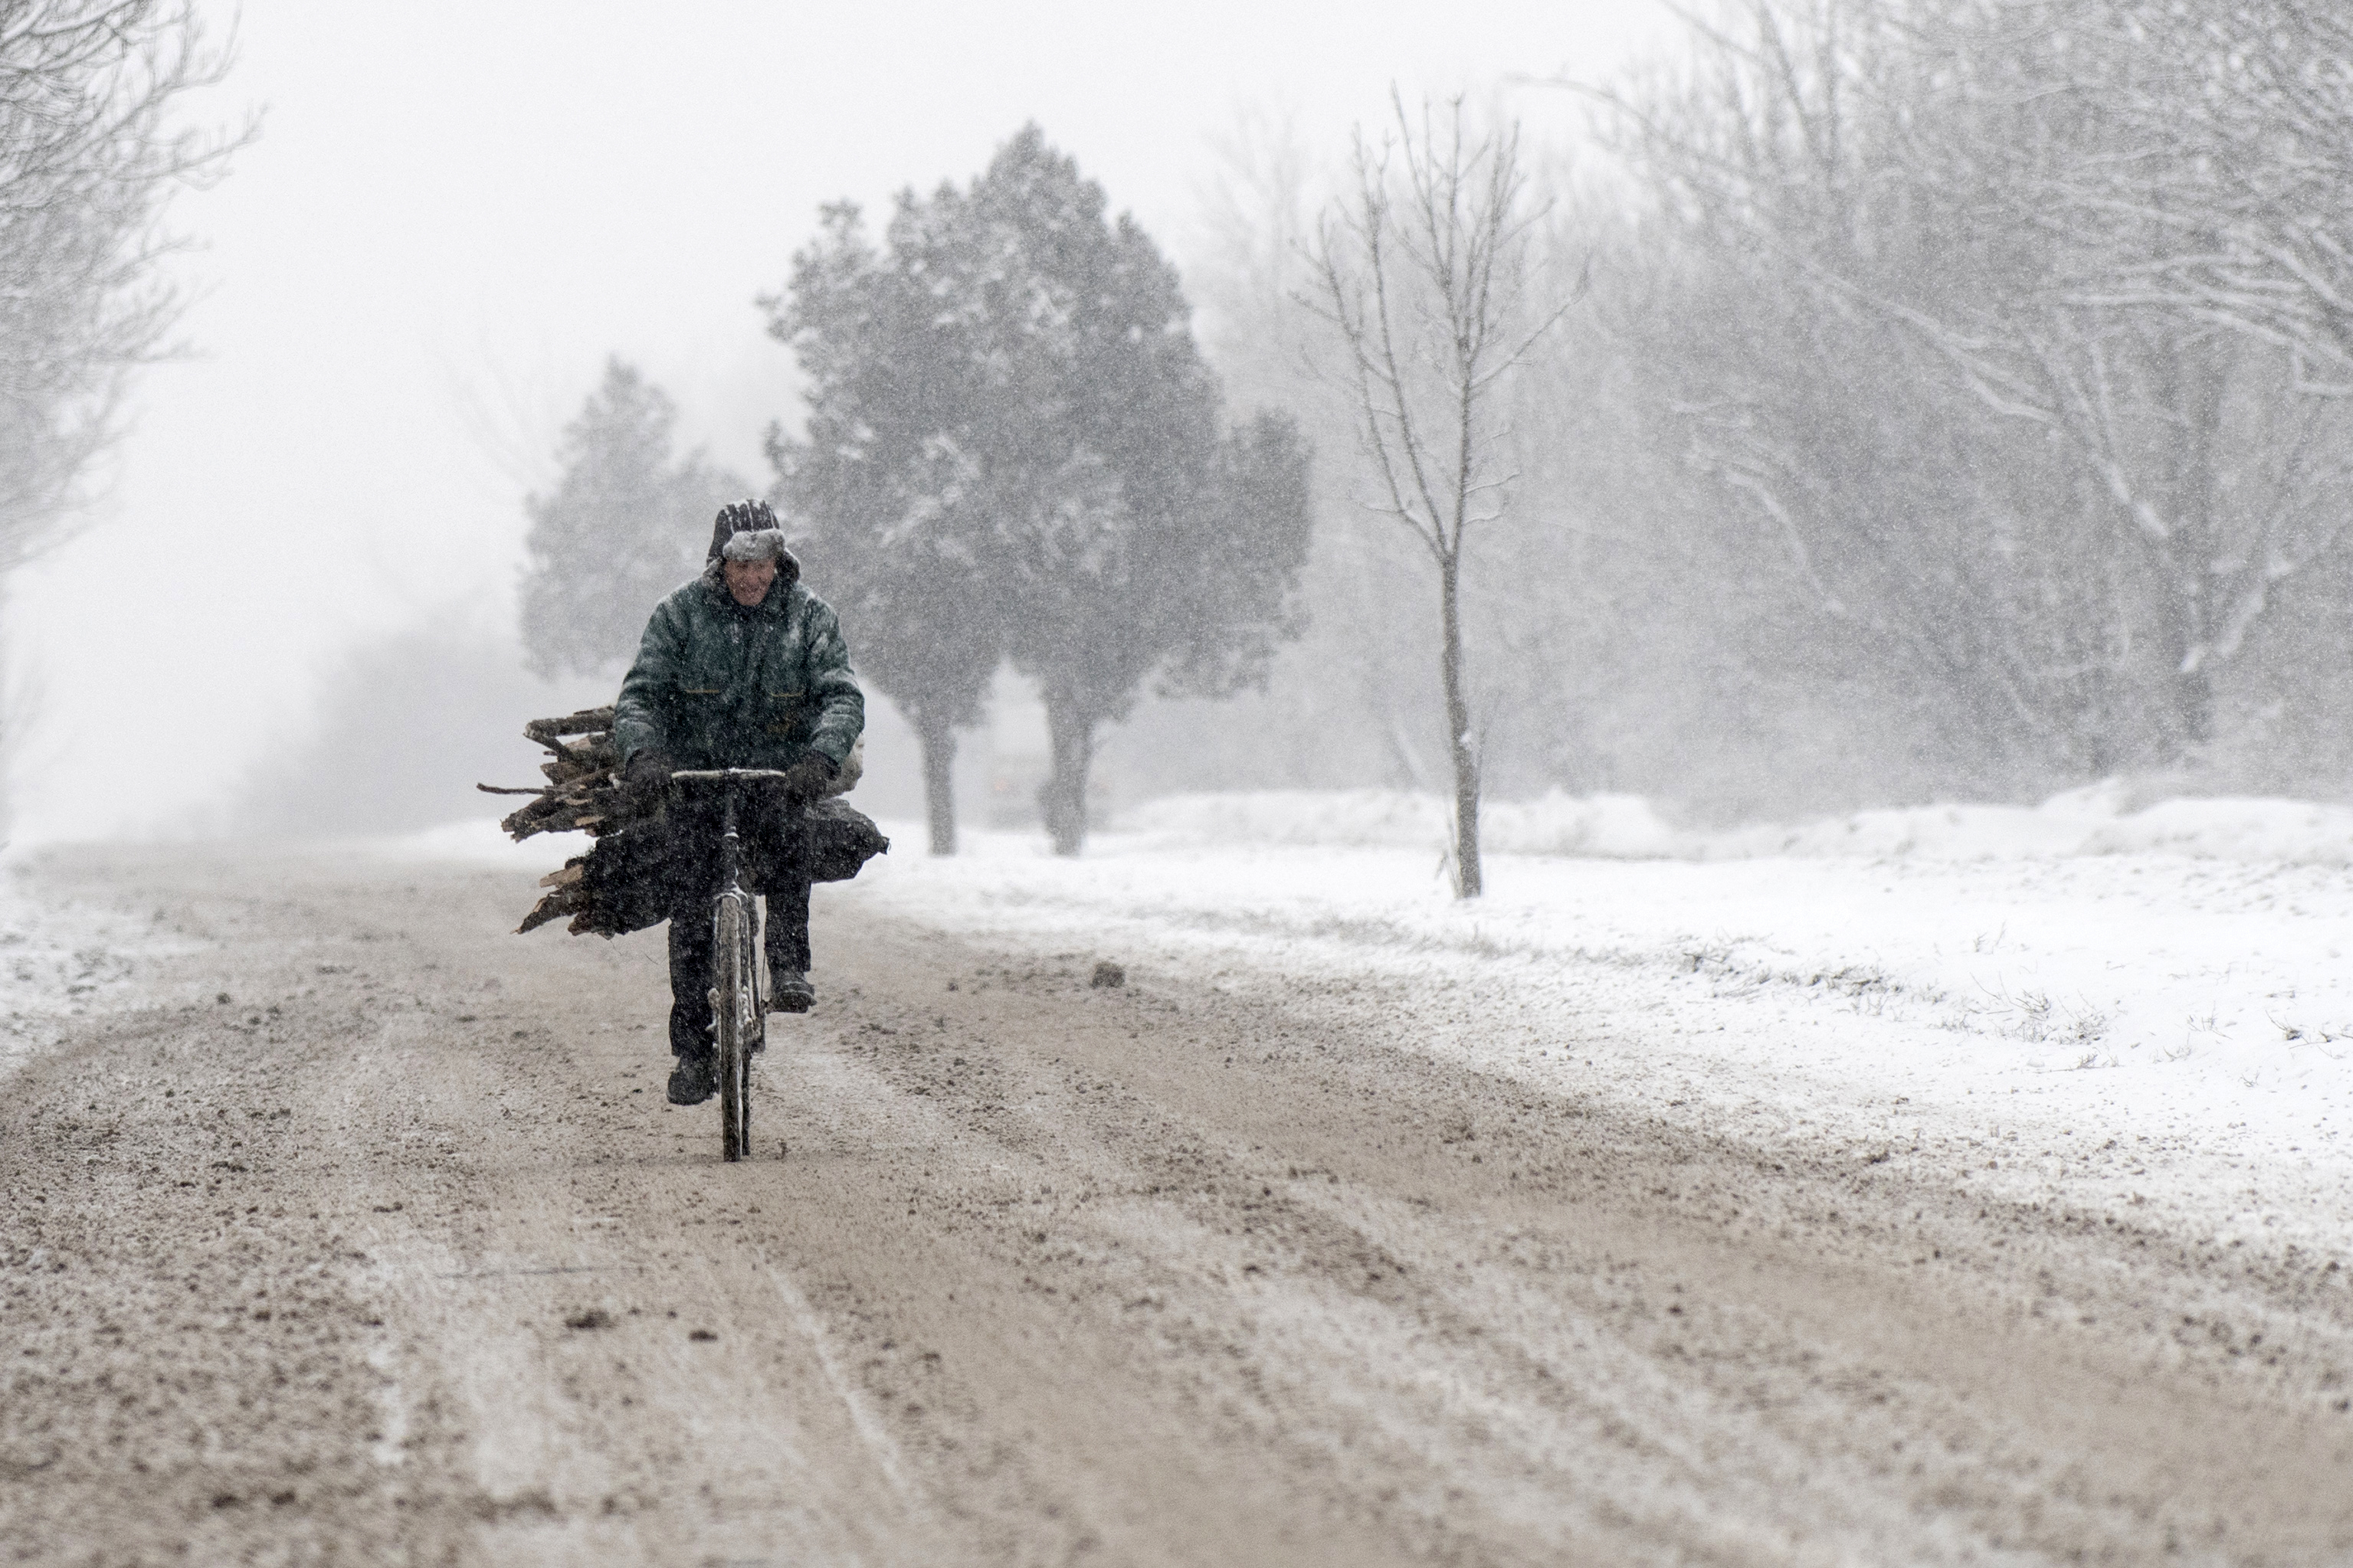 FILE PHOTO: A man rides a bicycle laden with woods during a heavy snowfall in a suburb of Sofia, as temperatures dropped to minus 19 C in Bulgaria on January 10, 2017. / AFP PHOTO / NIKOLAY DOYCHINOV